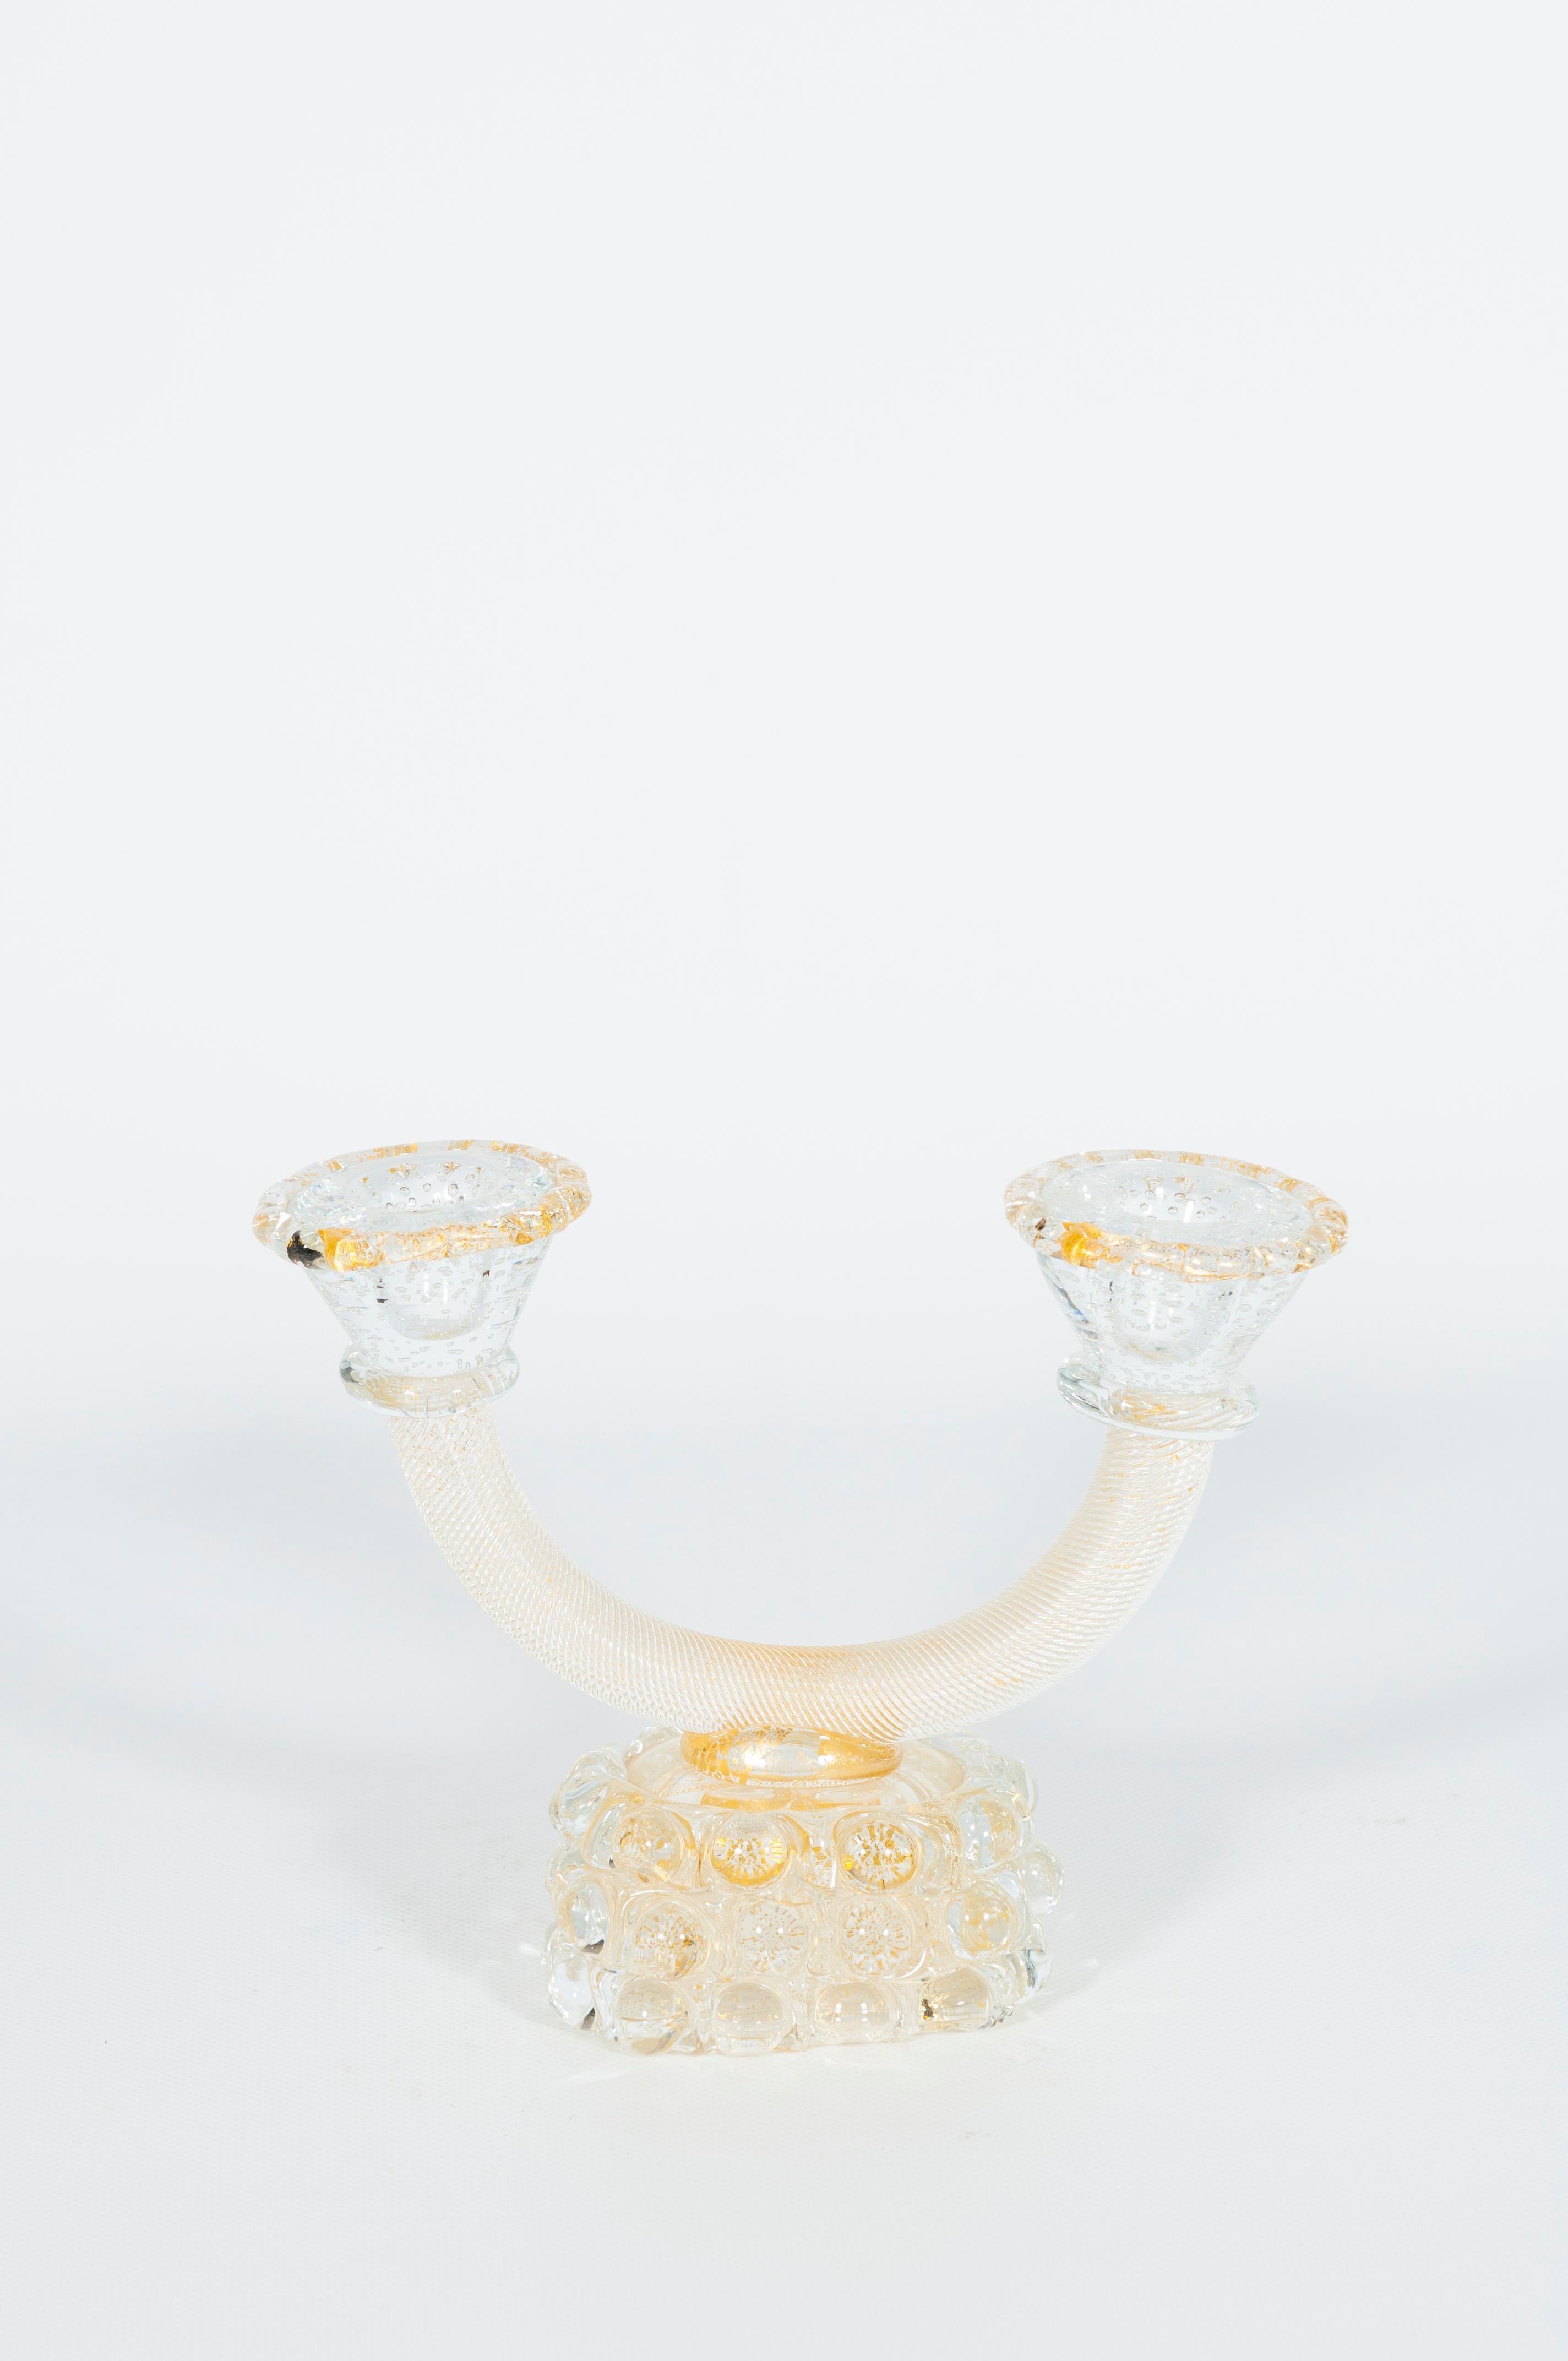 Murano Glass Torciglione Candle Holder with Submerged Gold Attributed to Seguso For Sale 2